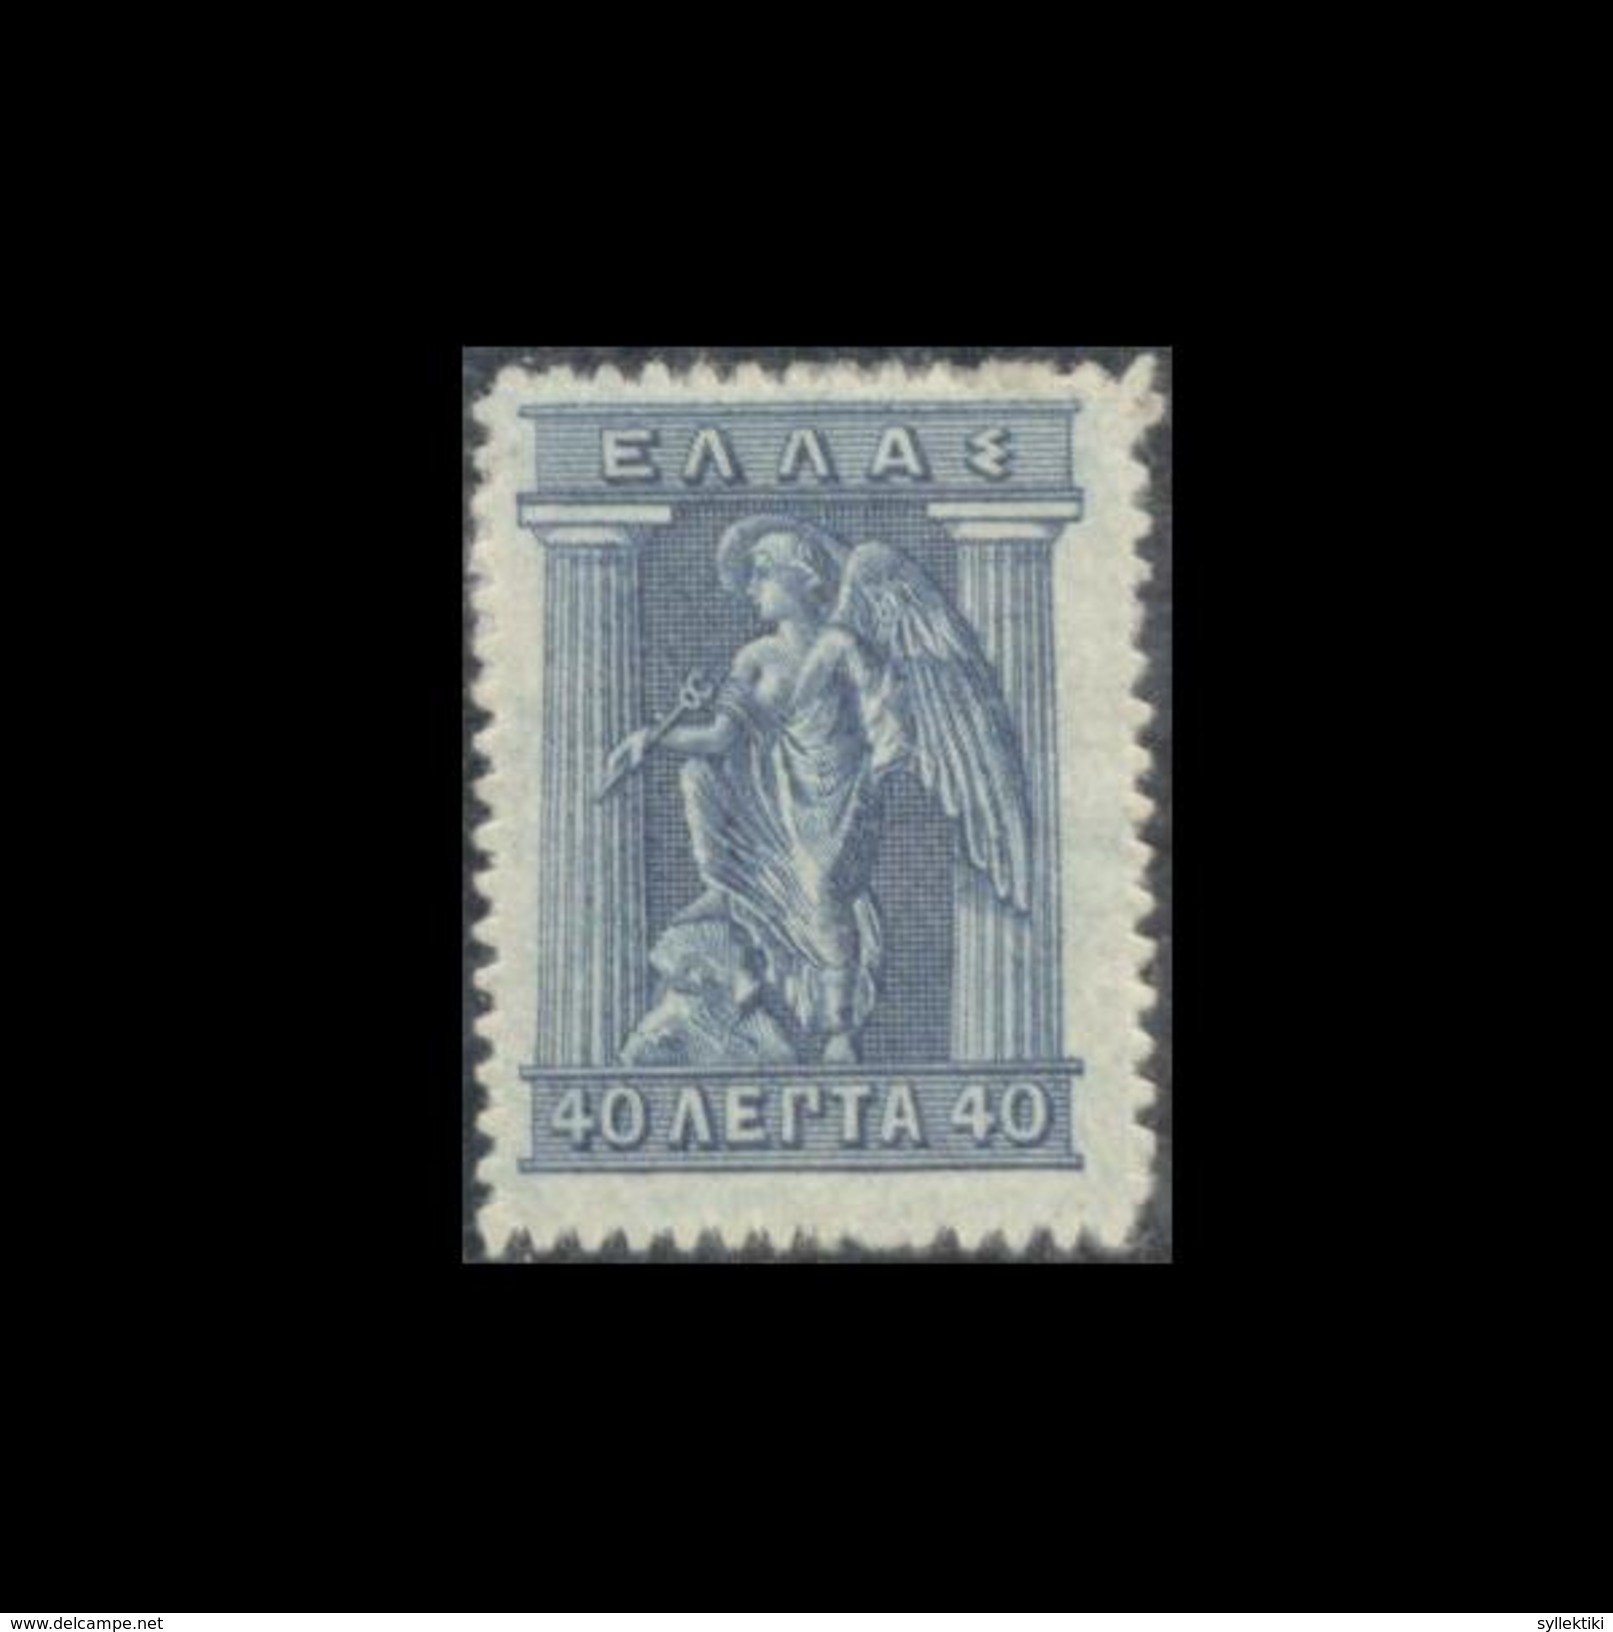 GREECE 1911 ENGRAVING ISSUE 40 LEPTA MH STAMP - Unused Stamps